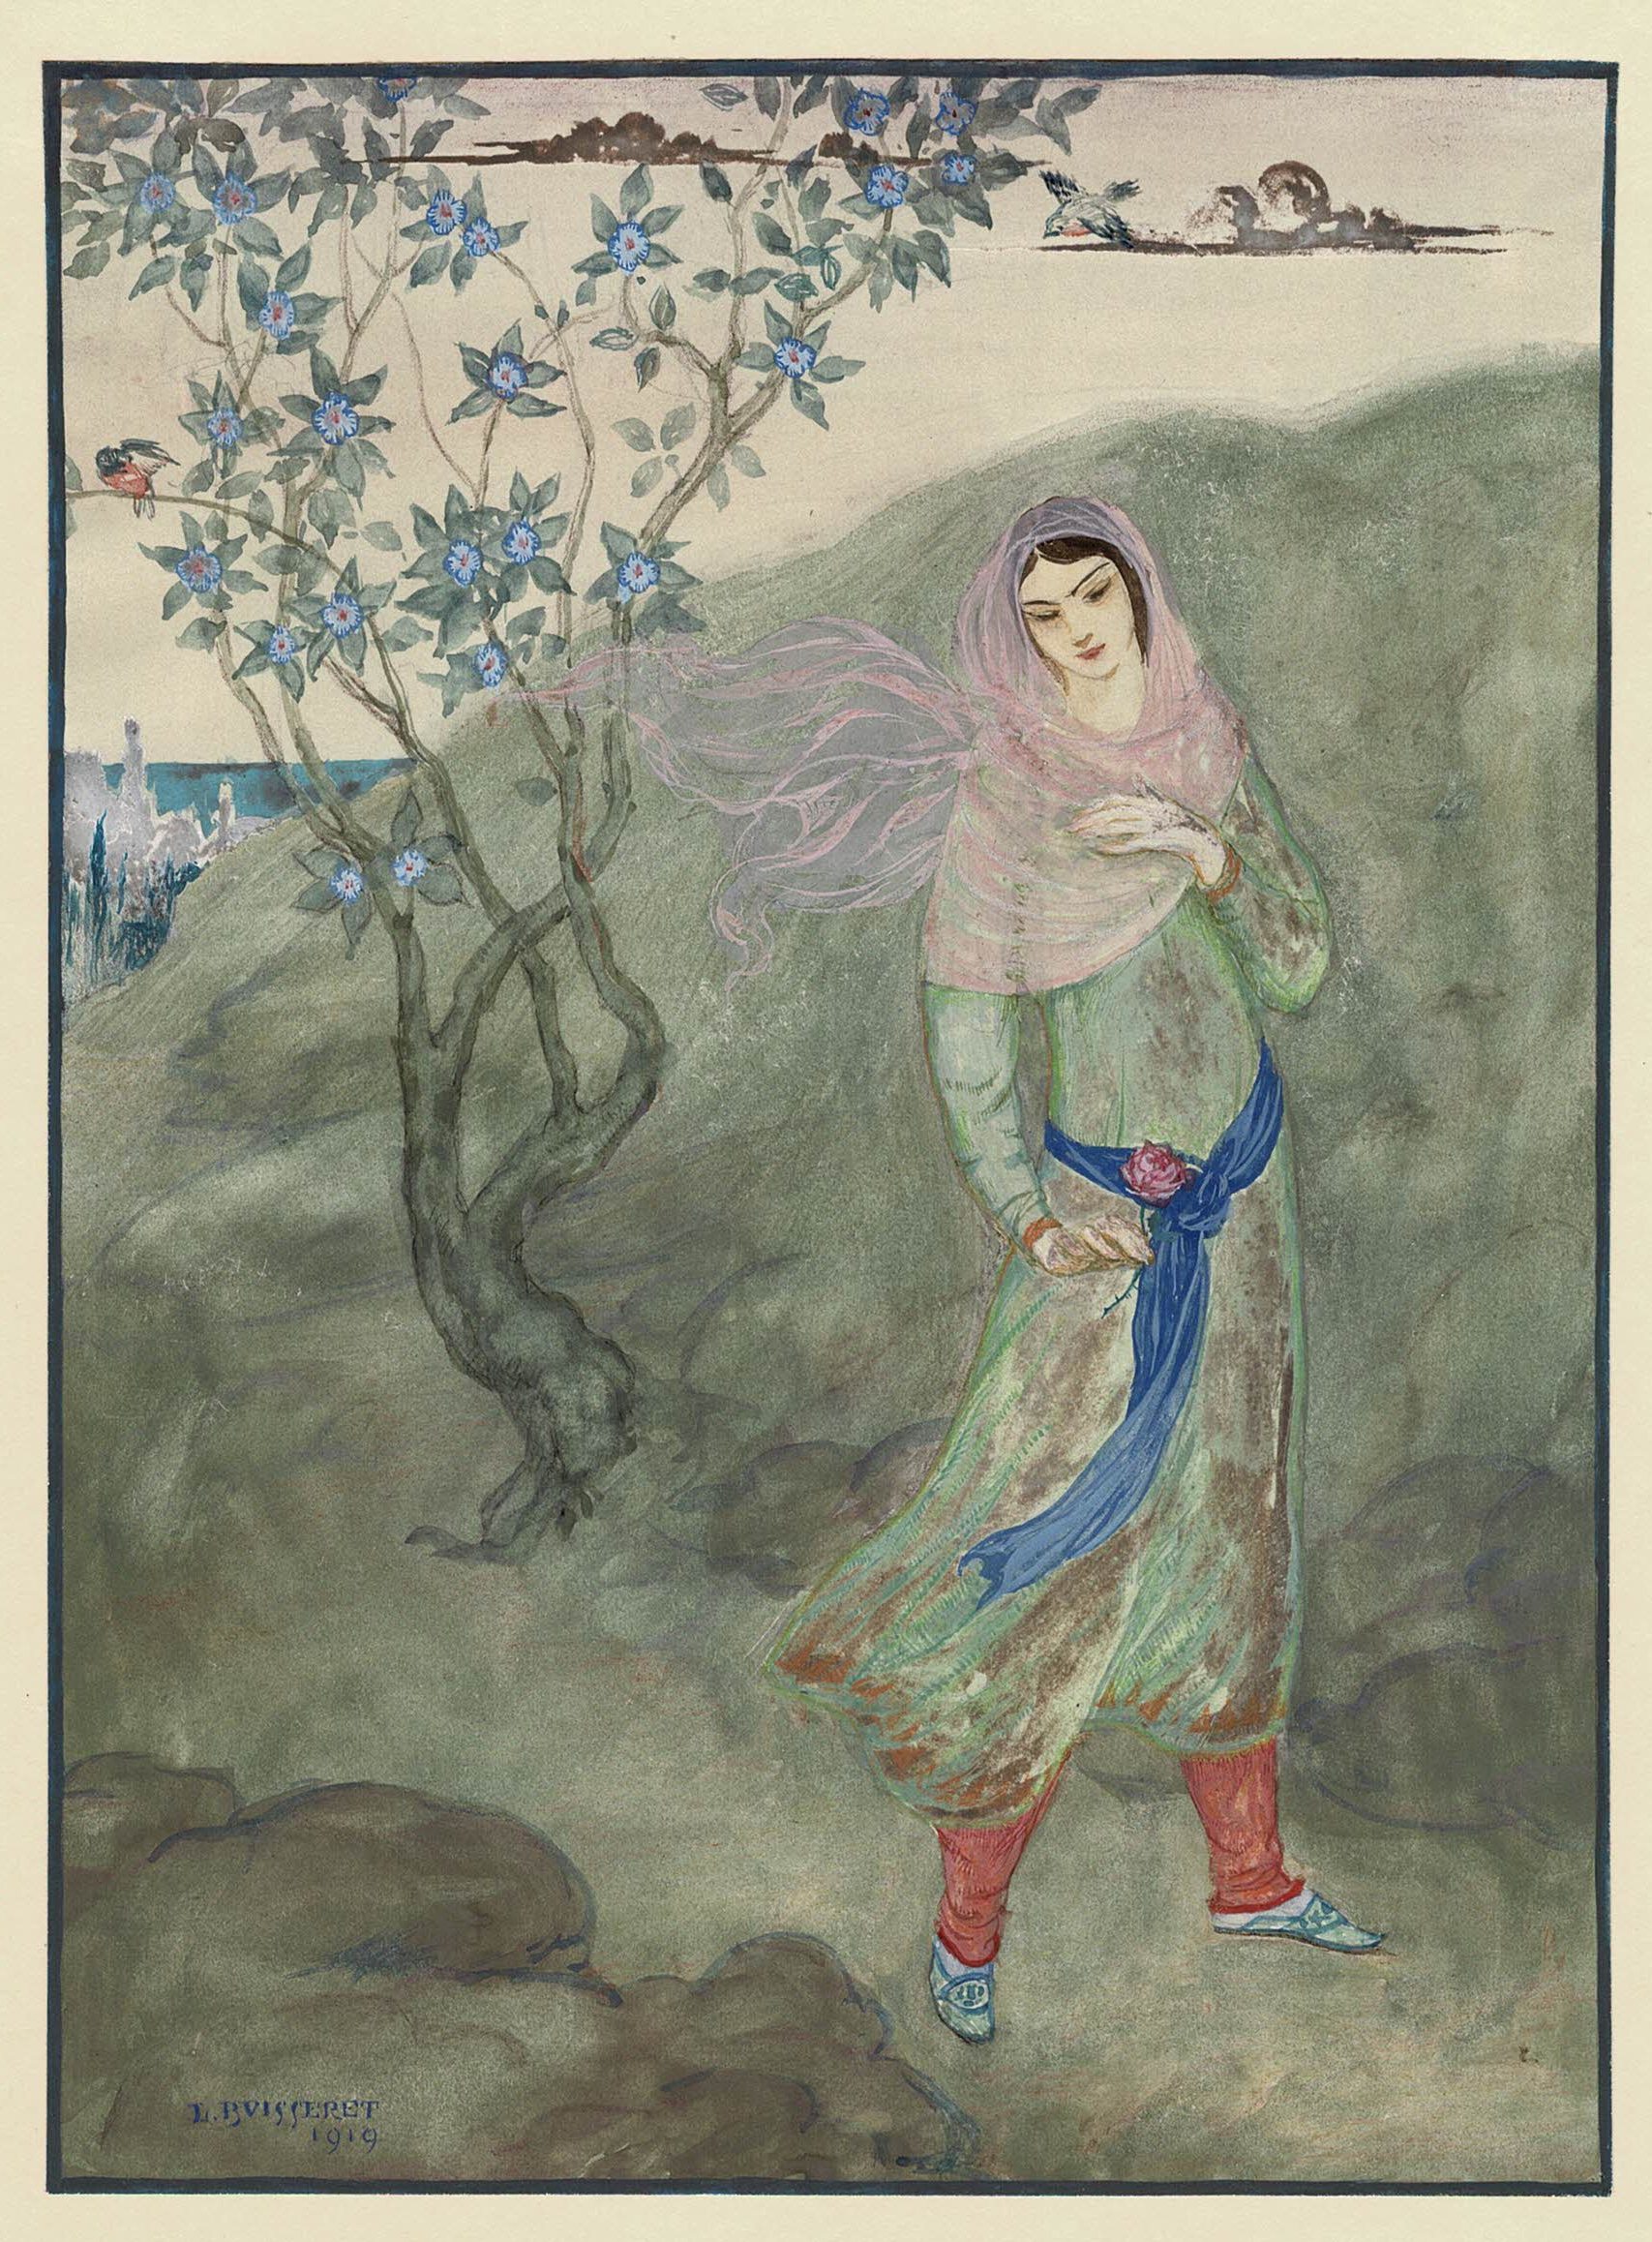 Louis Buisseret: Aquarelle, "Orientale" Woman with a rose walking.